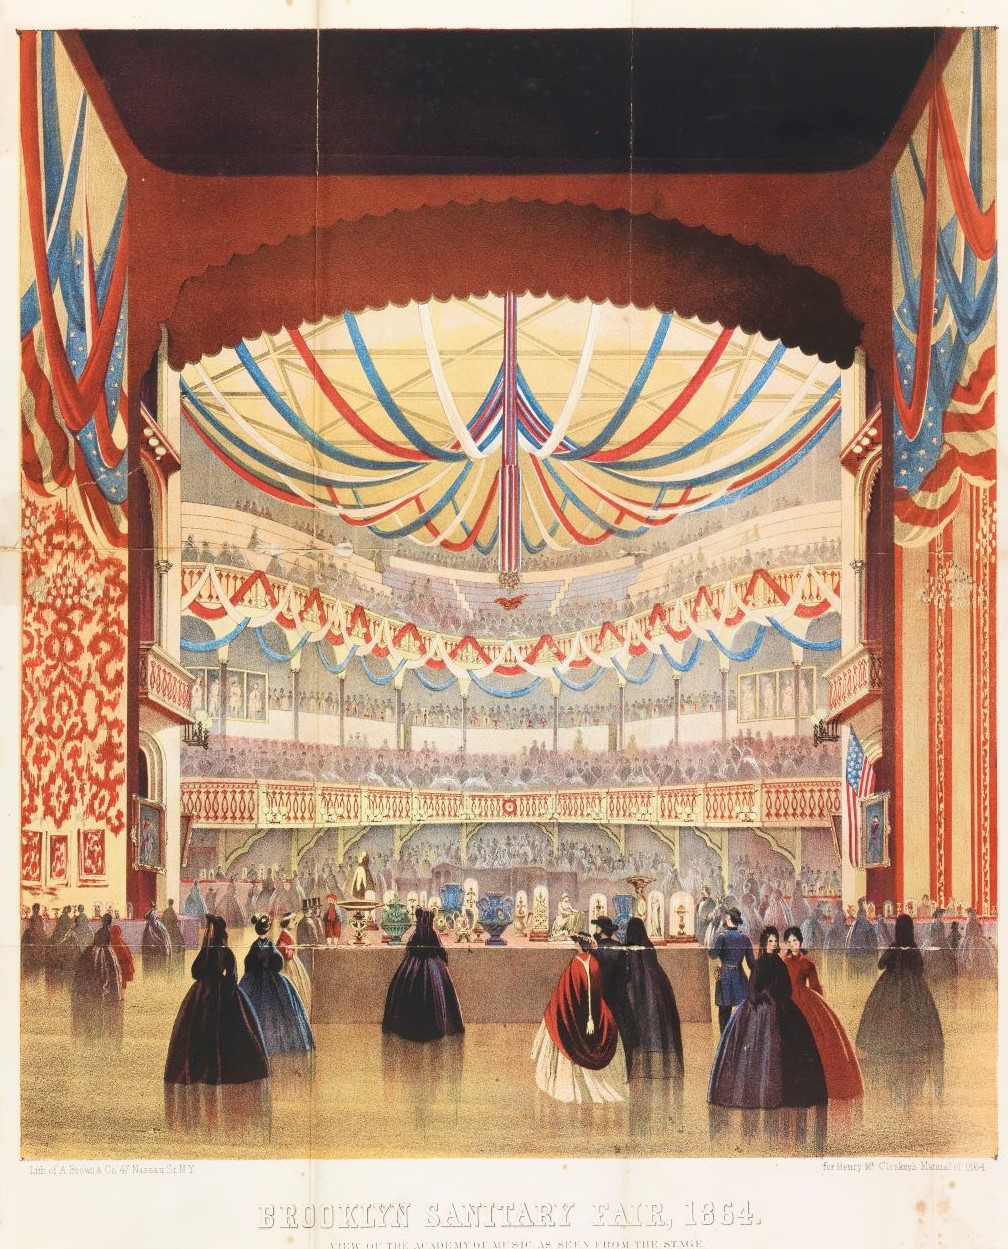 This image features a view from the Brooklyn Academy of Music stage looking out at the theater’s great hall and balconies festooned with red, white, and blue streamers, bunting, and American flags. People in 19th attire meander along shopping for household wares and other goods. Please scroll down to read the blog post about this object.